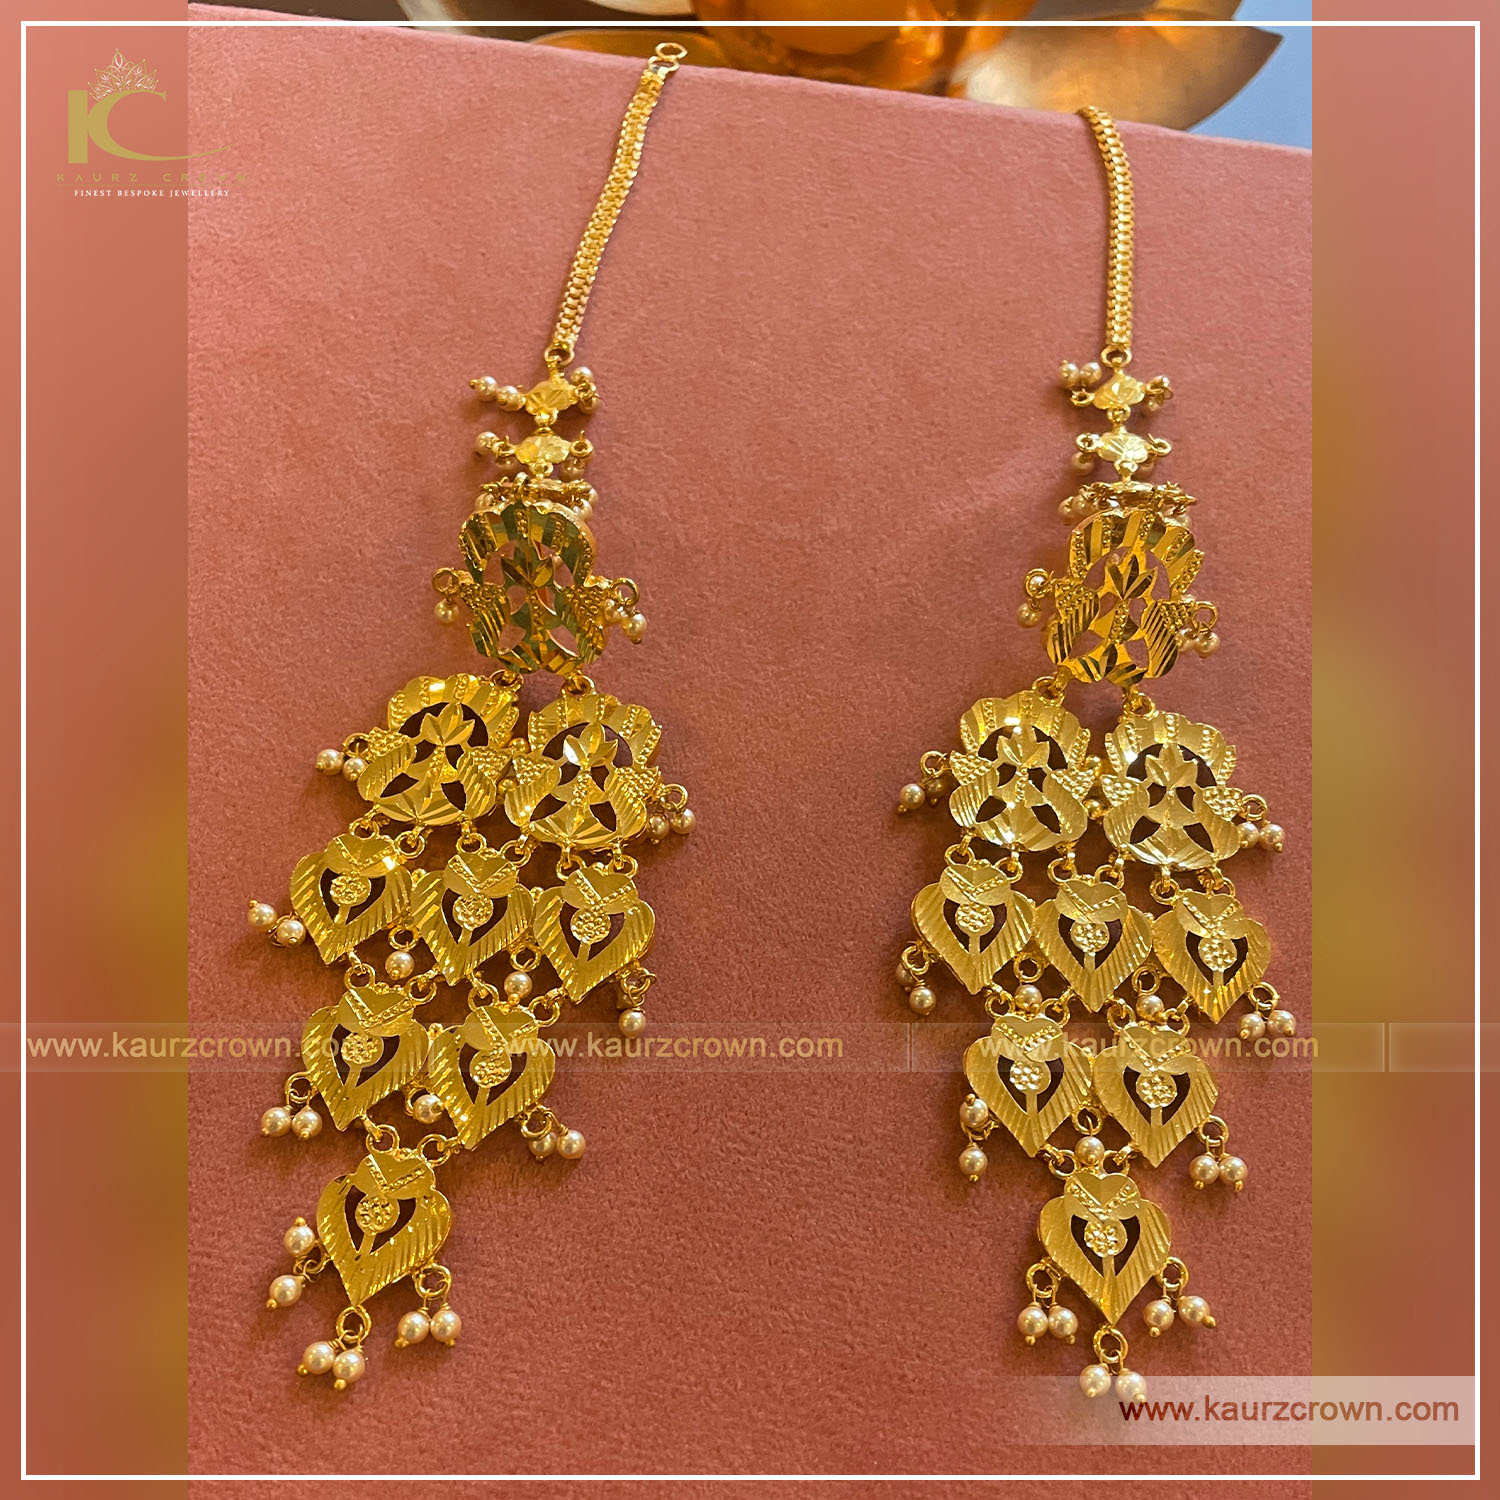 Punjabi Traditional Jewellery - Gold Finished Ruby Kundan Jhumki Earrings  by Punjabi Traditional Jewellery  •••••••••••••••••••••••••••••••••••••••••••••••••••••⠀ You may also DM us  OR contact us at +91 9914721111 to buy ...